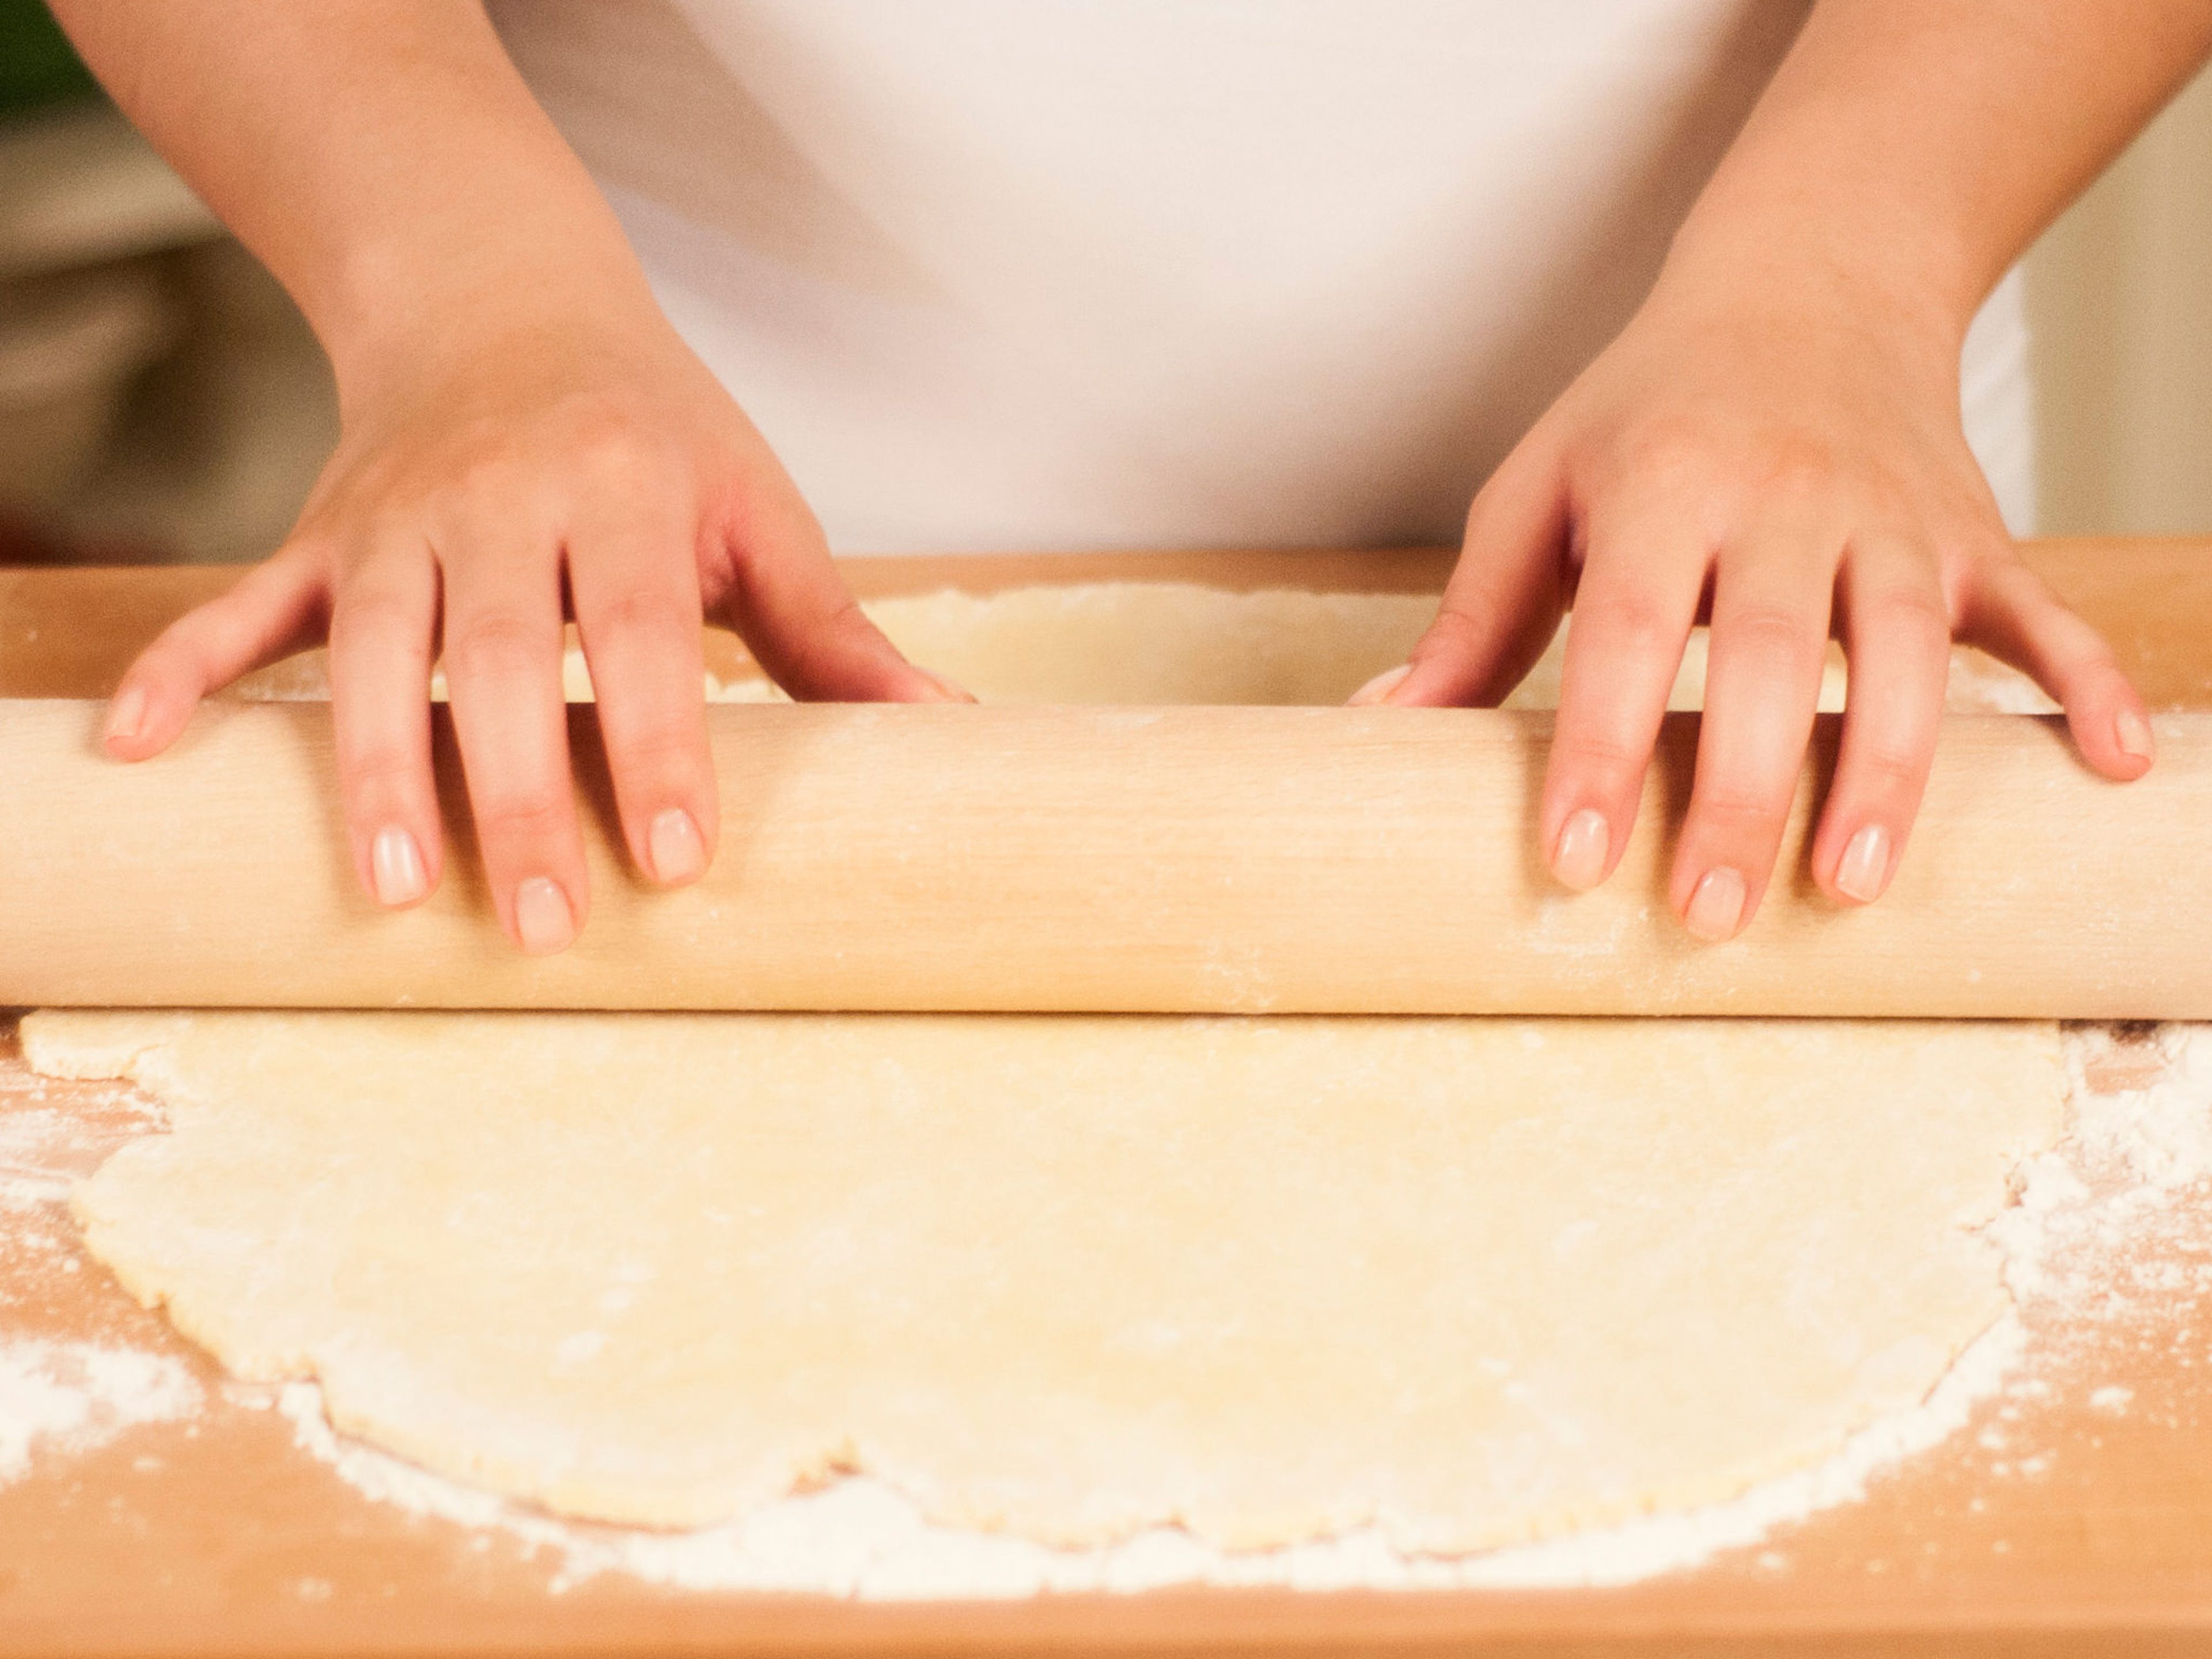 With a rolling pin, roll the dough into a round that is a little larger than the tart tin. Work on a floured surface and turn the dough a couple of times to prevent sticking.